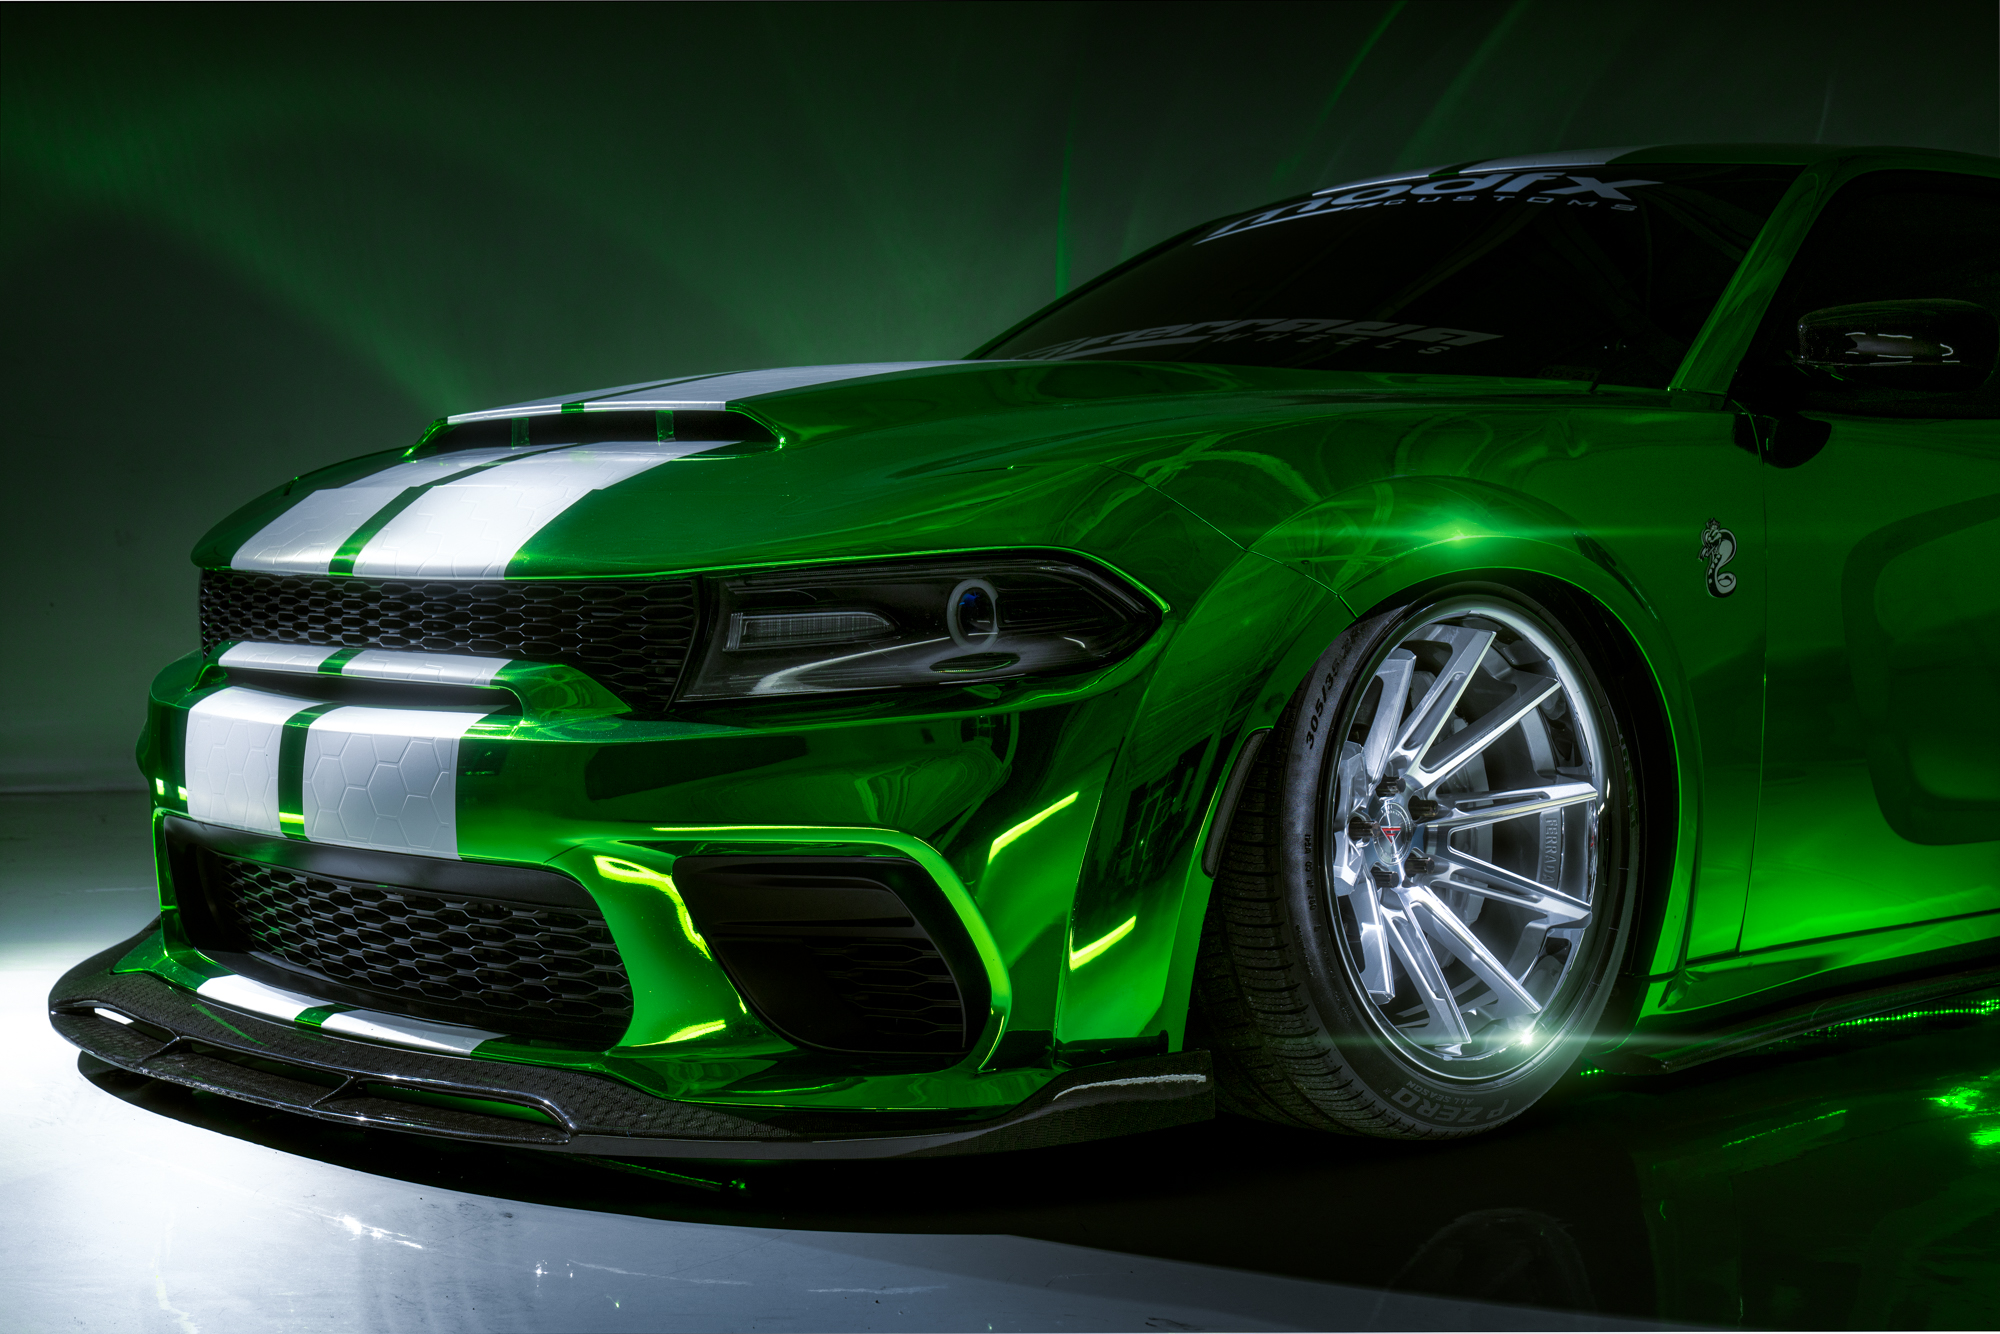 2020 Dodge Charger Widebody - CM2 MS (2 of 6)